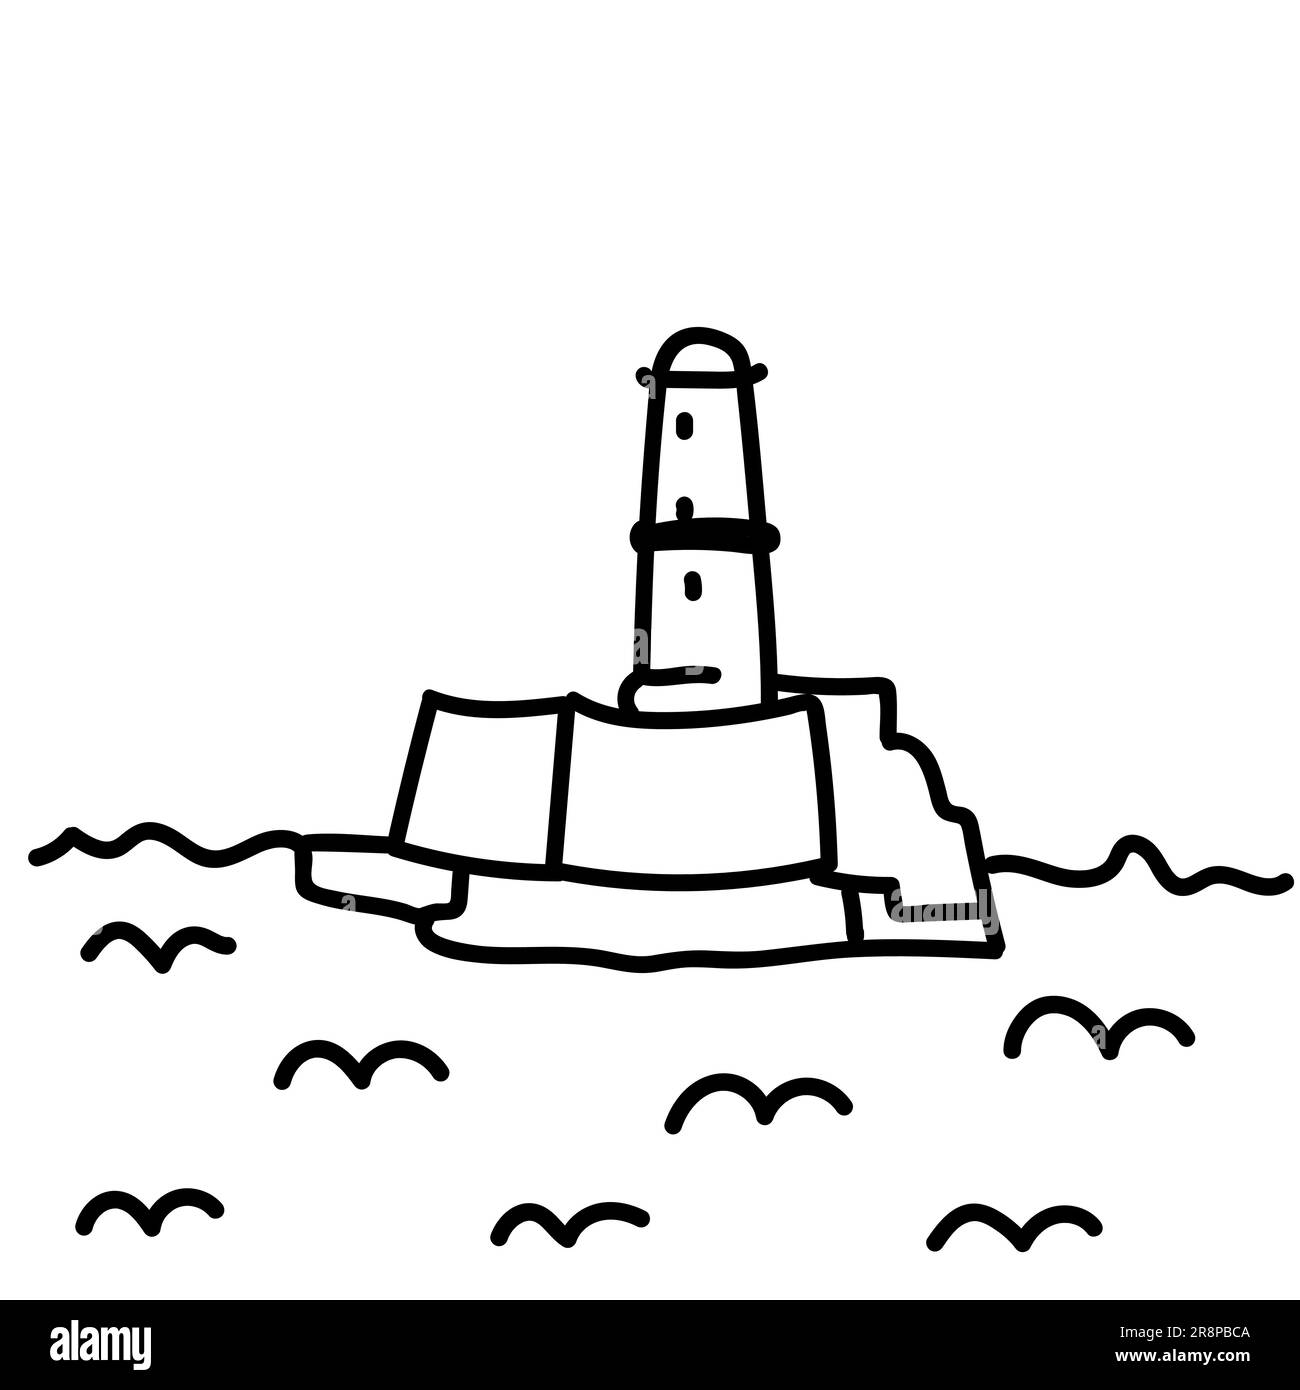 Marseille fort. Hand drawn doodle vector illustration isolated on whithe background. Simple drawings with black color. Stock Vector